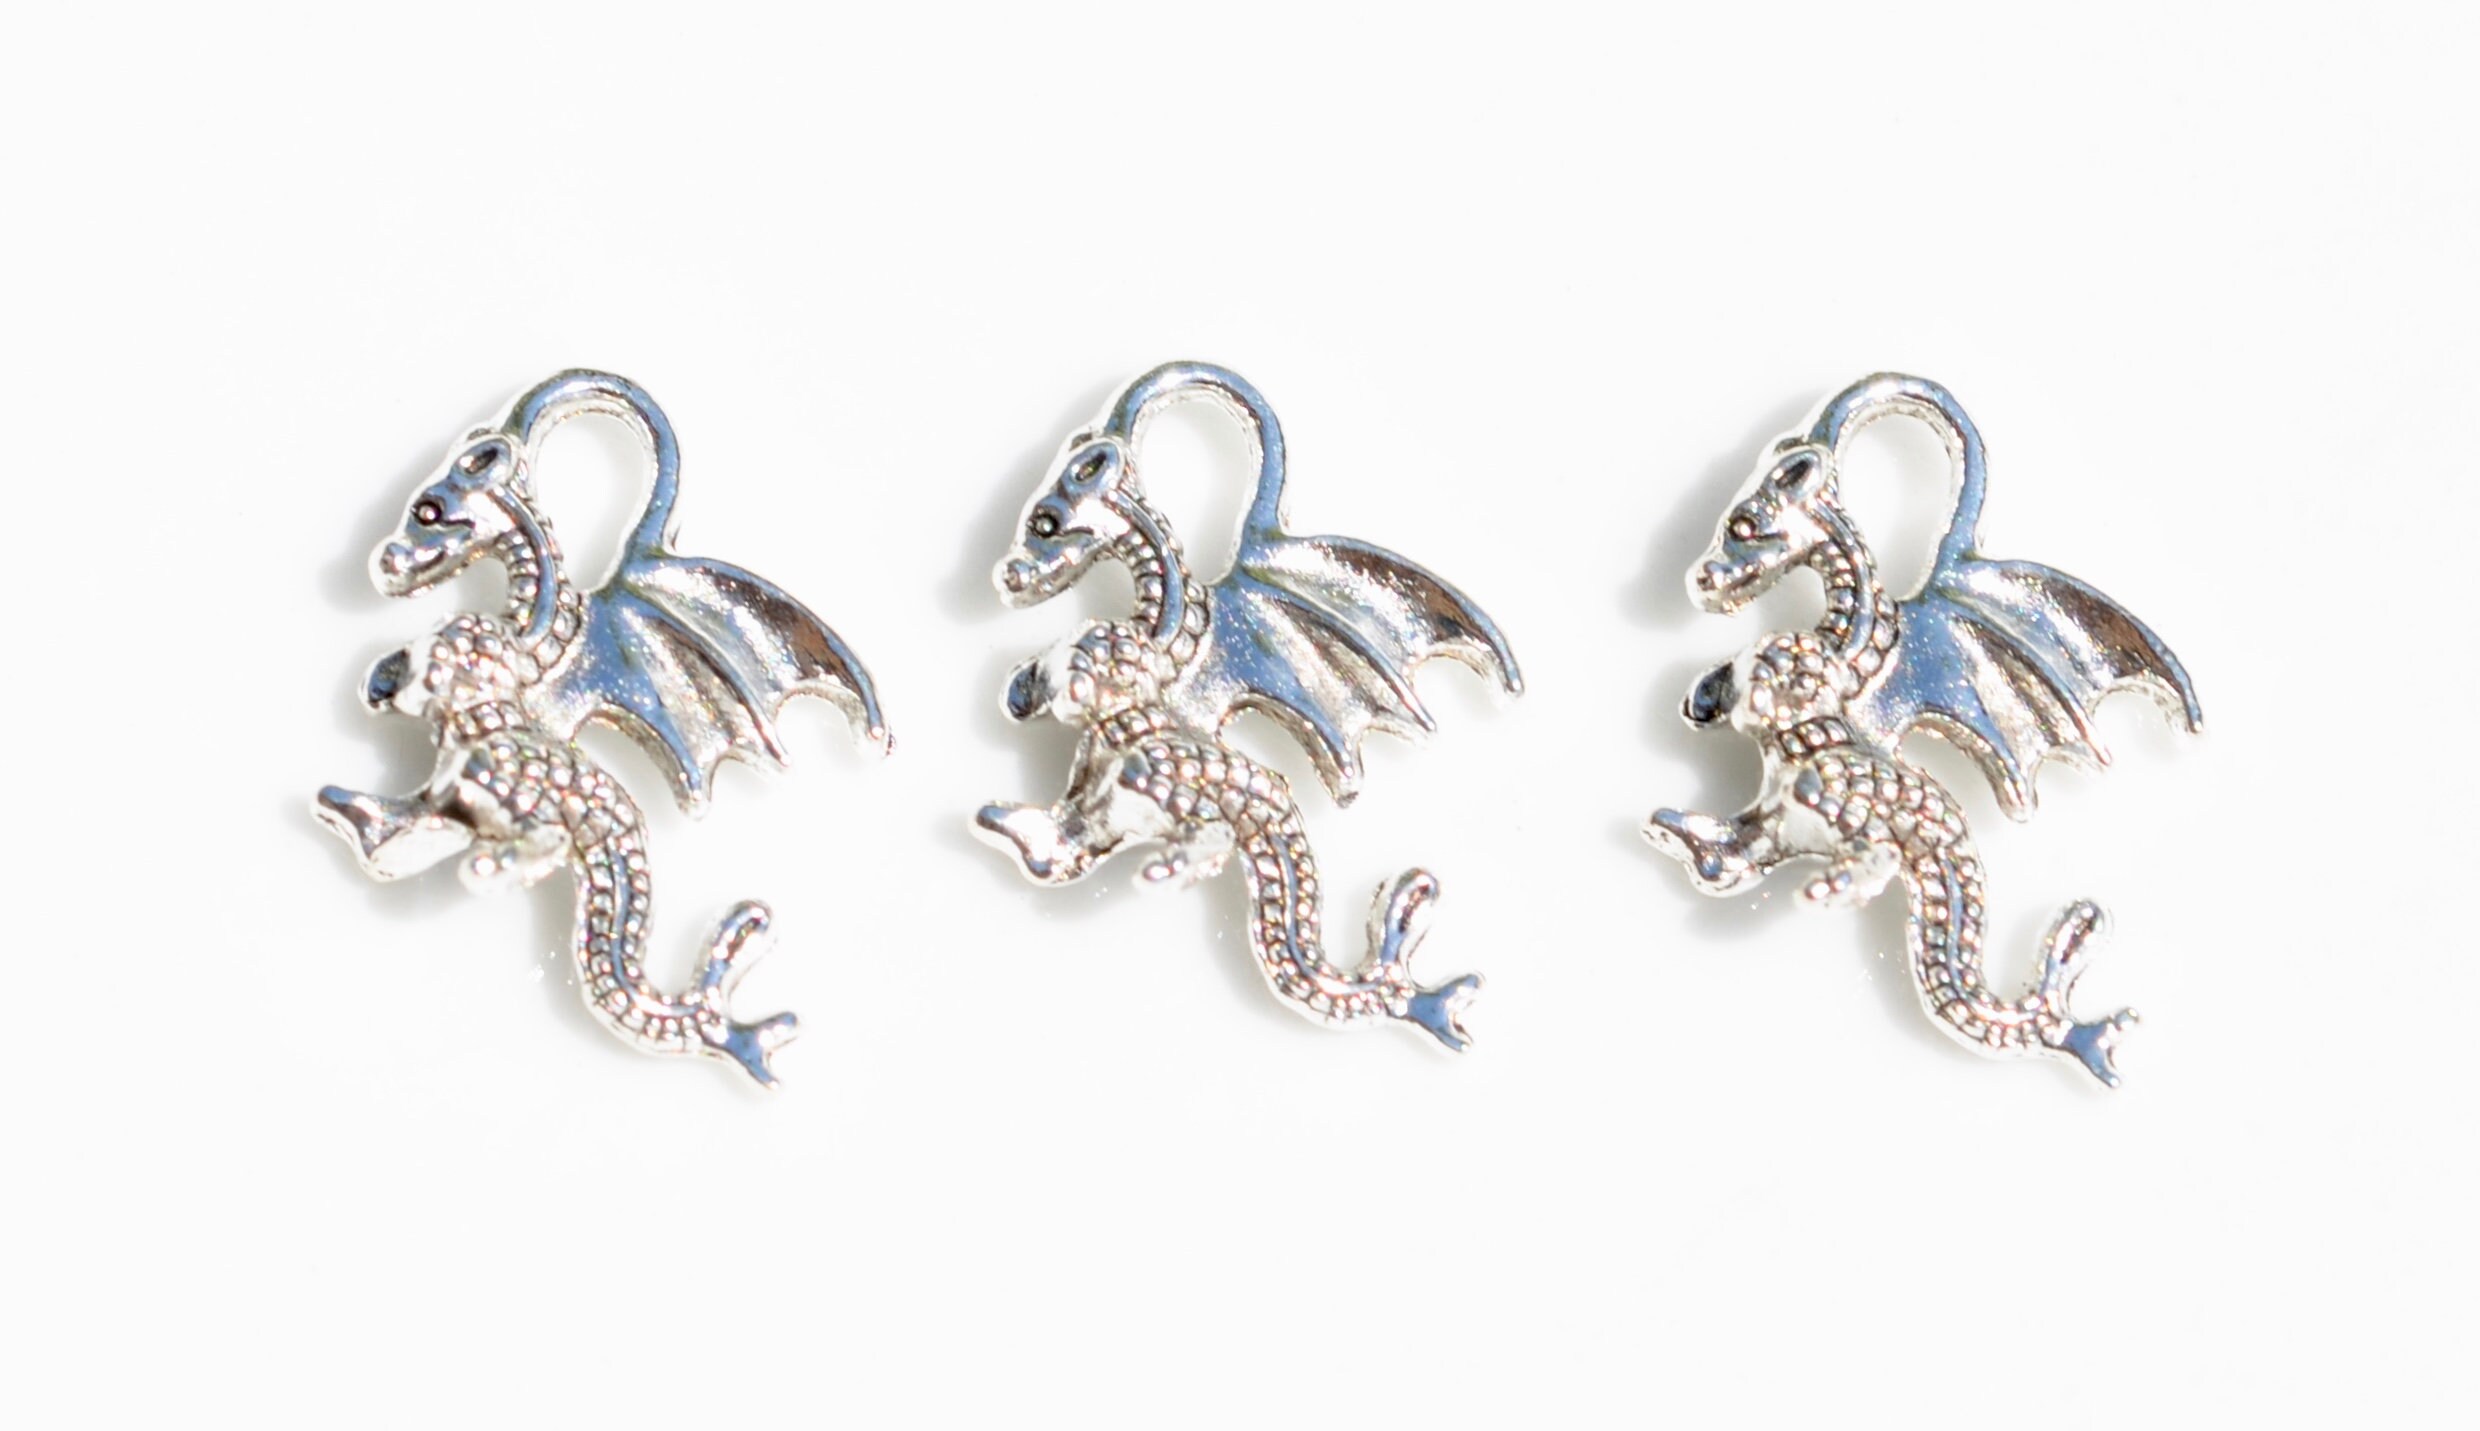 10 Dragon Silver Tone Double Sided Charms SC3945 